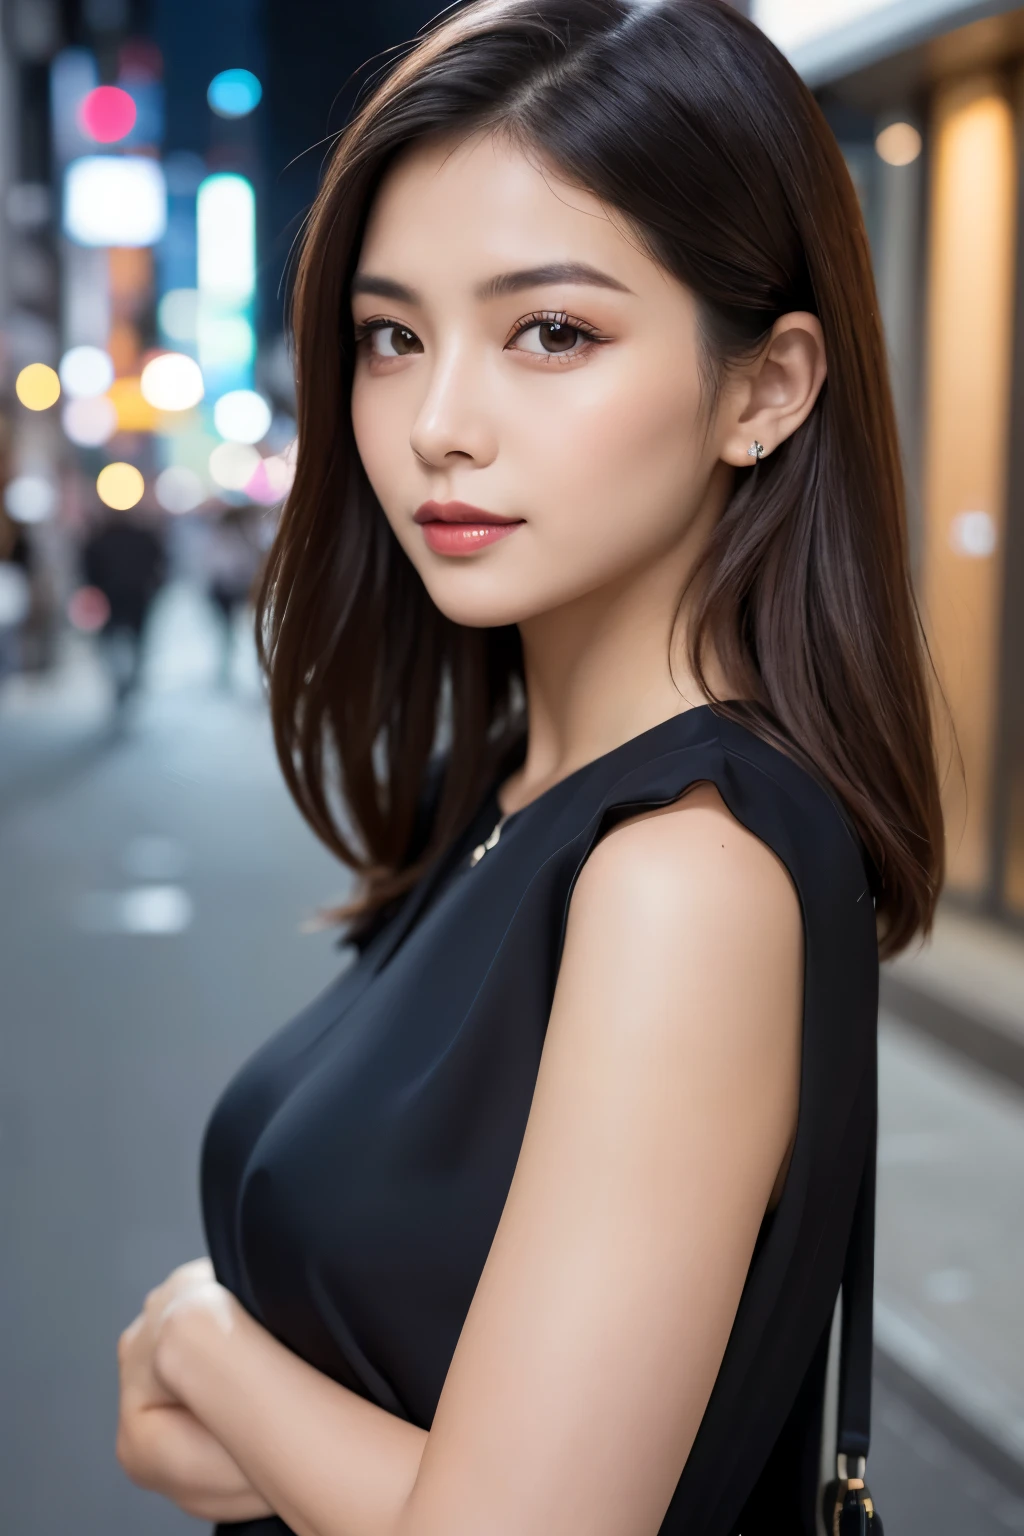 1womanl, hyperdetailed face, Detailed lips, A detailed eye, double eyelid, ssmile, Colorful silk blouse, , The upper part of the body, a closeup, beautiful hairl, Ginza Street in Tokyo, early evening, A city scape, depth of fields, 8K, Raw photography, top-quality, ​masterpiece, realisitic, Photorealsitic, era of asian eyes